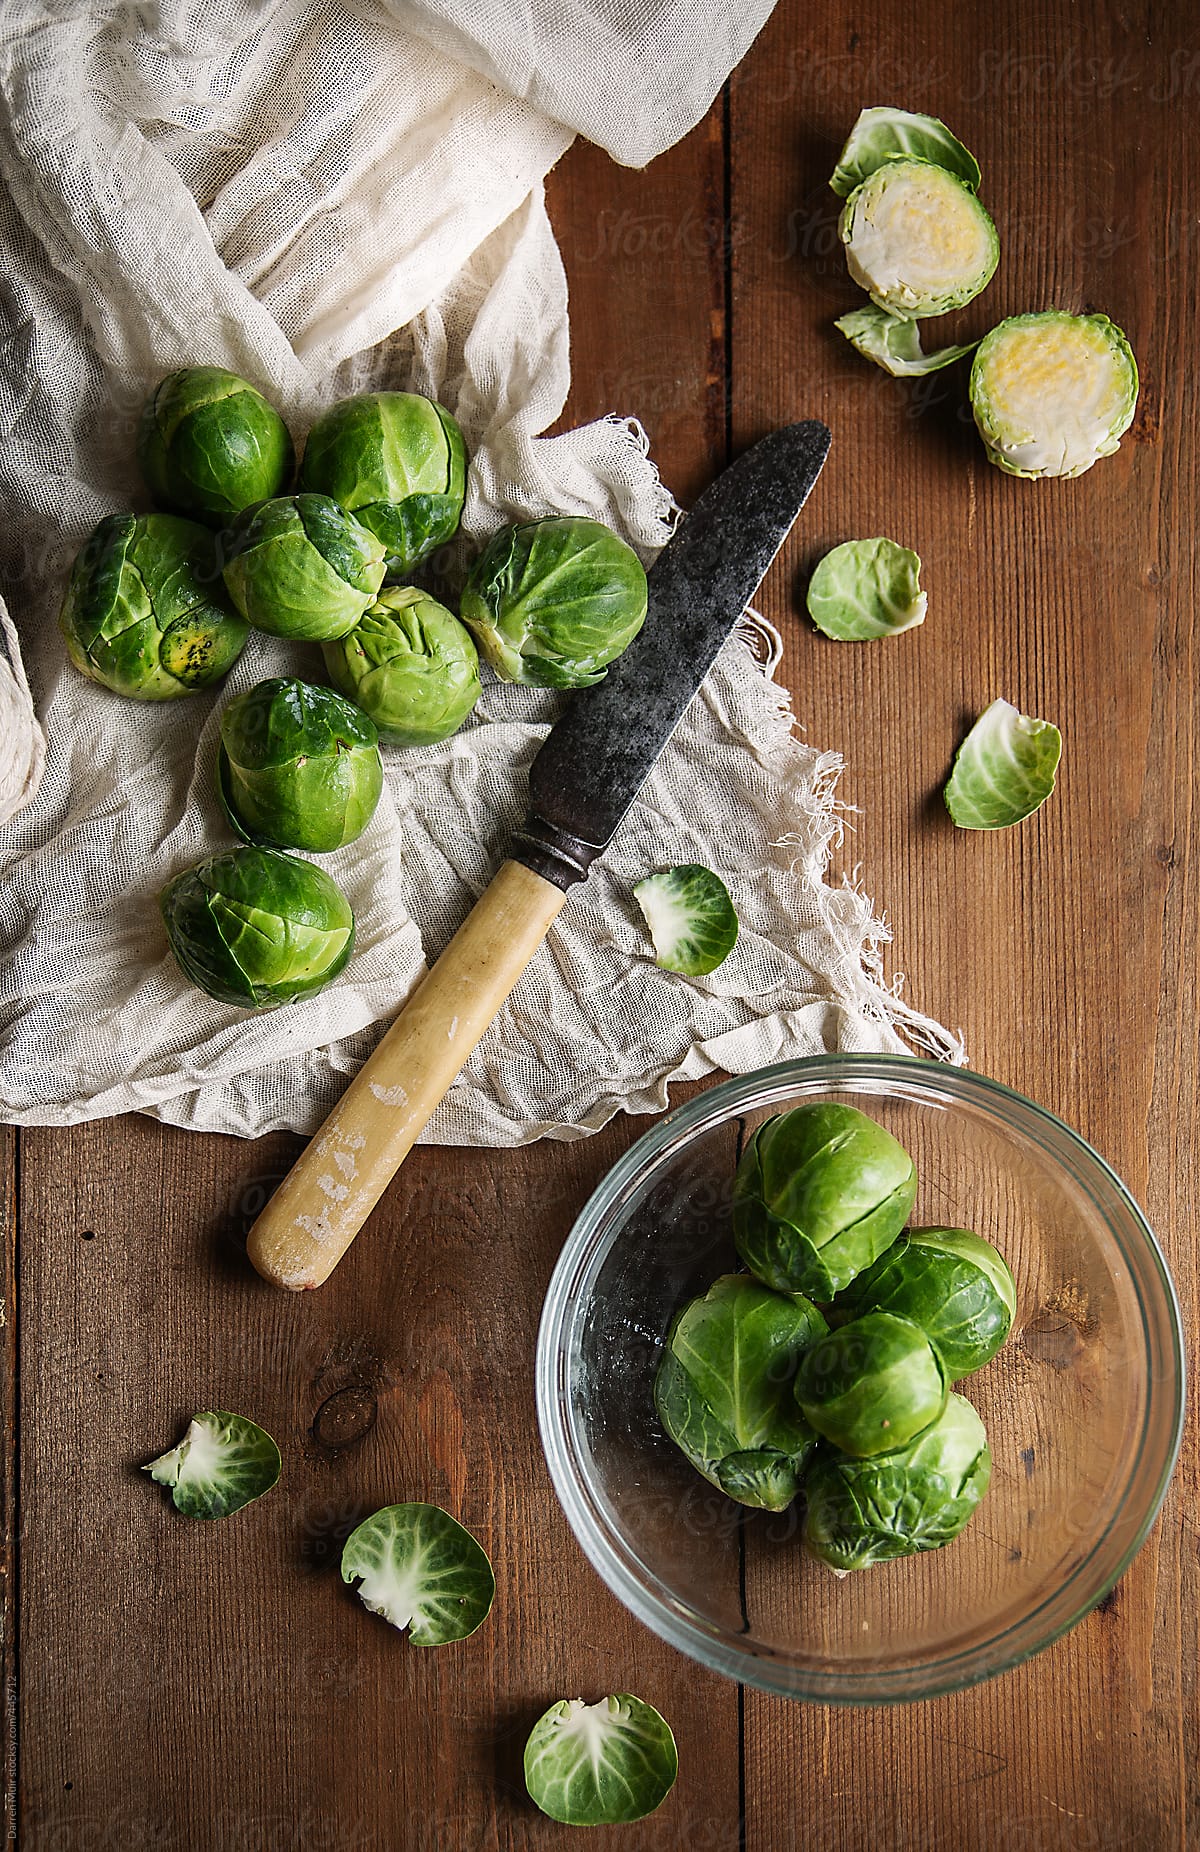 Preparing Brussels sprouts.